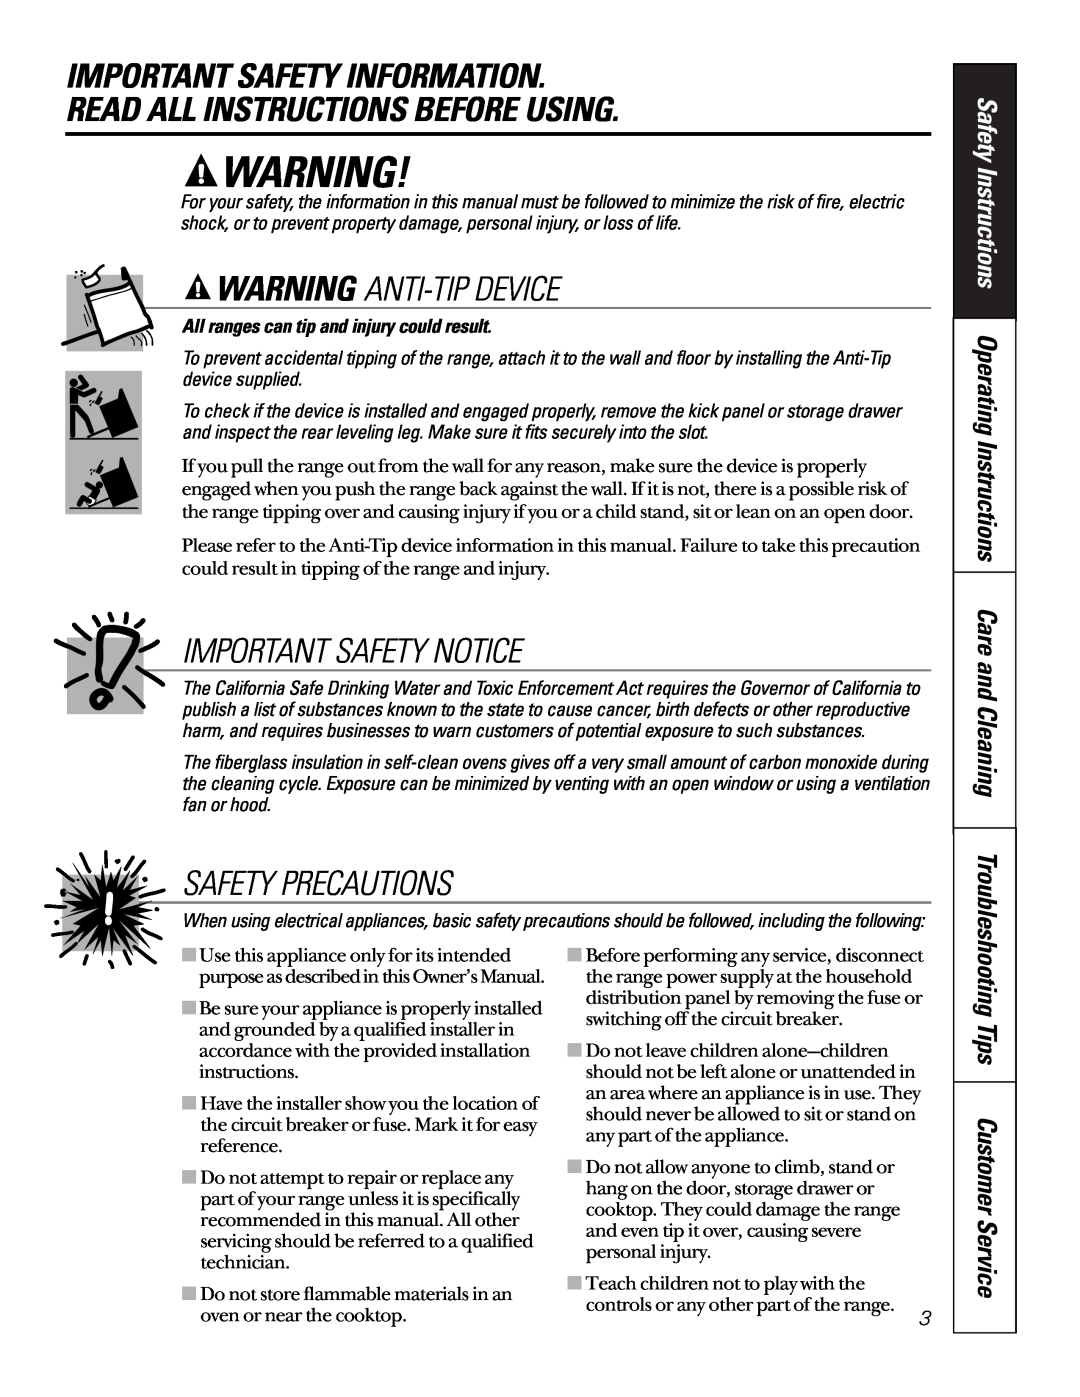 GE RB754 Important Safety Information, Read All Instructions Before Using, Warning Anti-Tipdevice, Important Safety Notice 